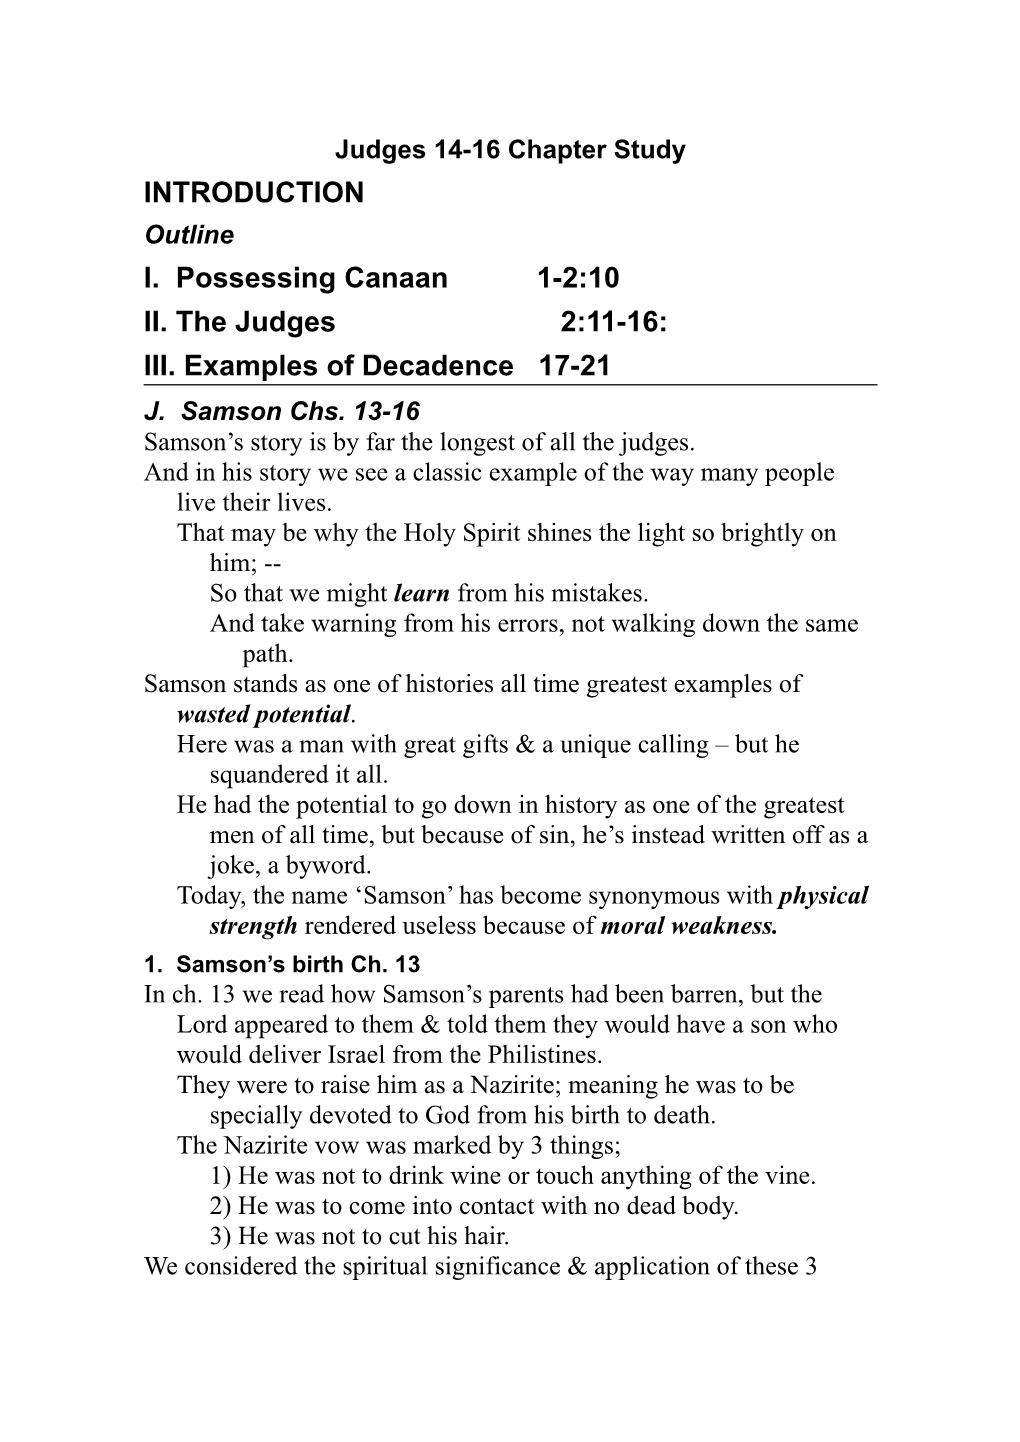 INTRODUCTION I. Possessing Canaan 1-2:10 II. the Judges 2:11-16